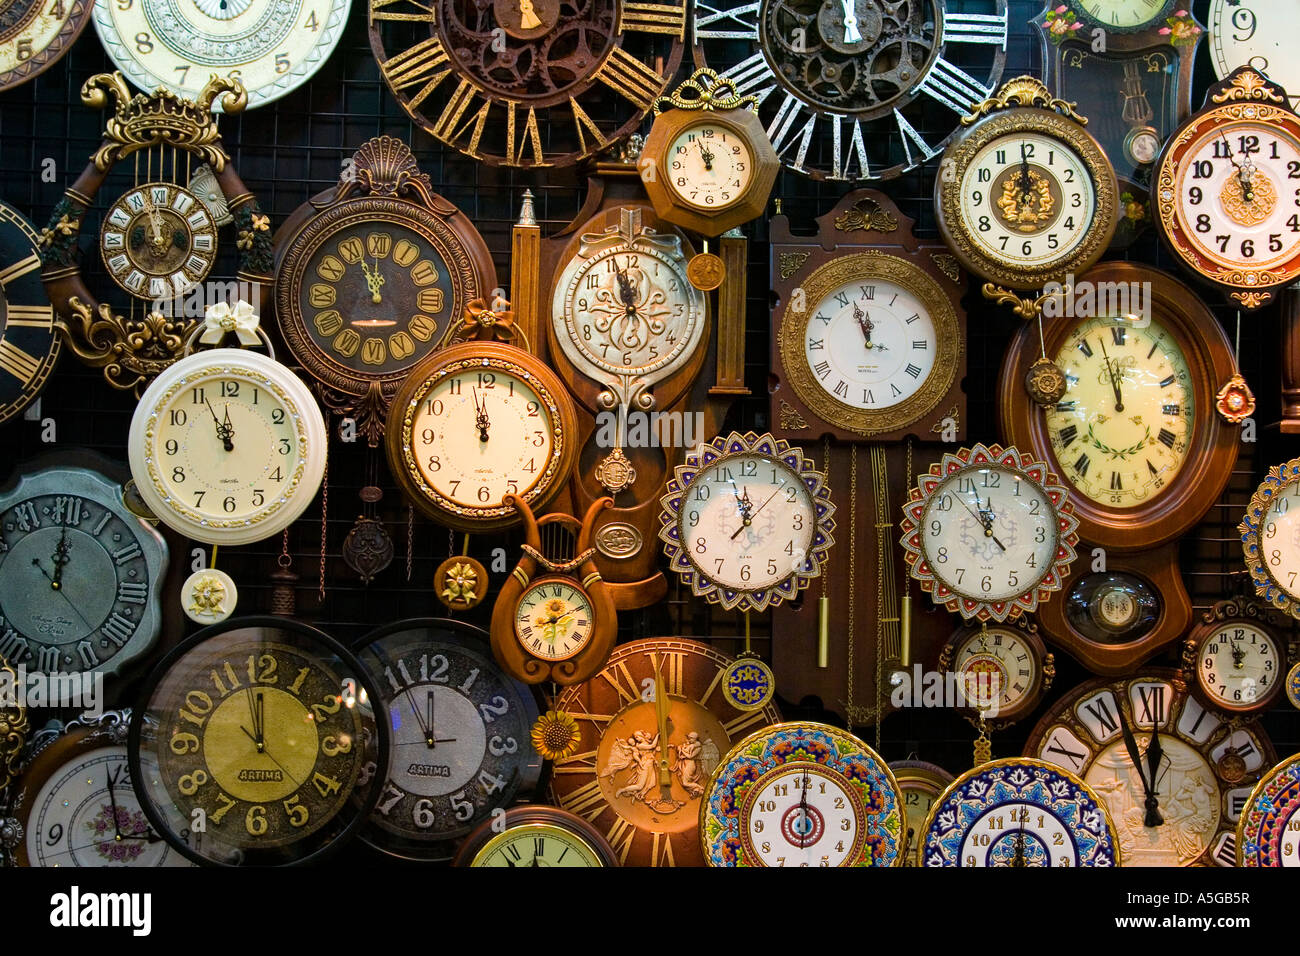 Wall of Clocks in a Store Stock Photo